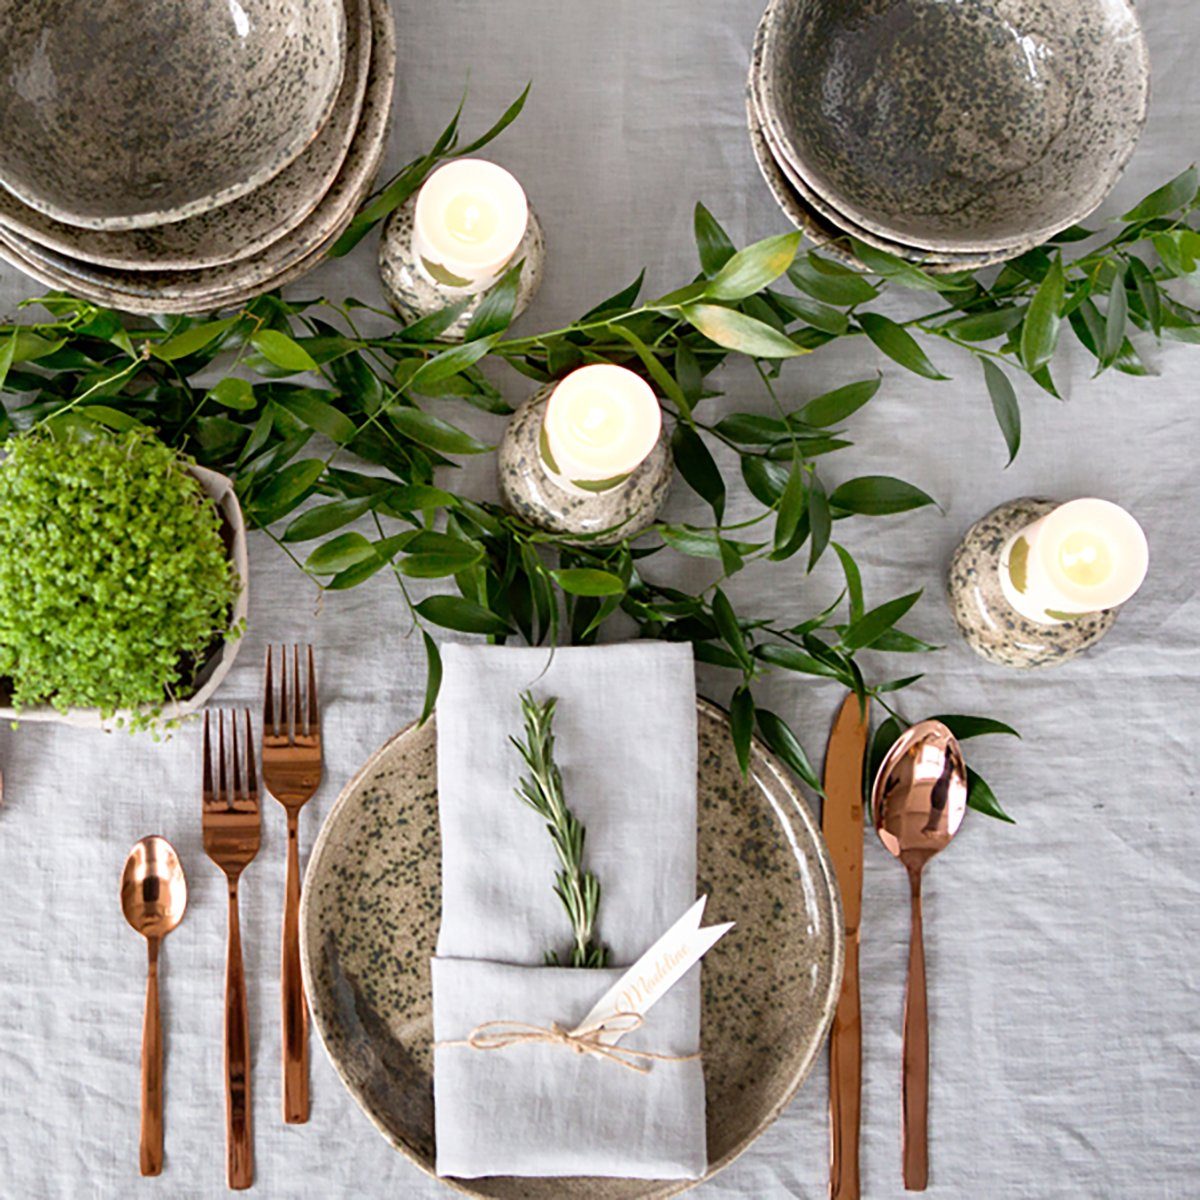 Holiday table setting with Linen napkins and rose gold cutlery